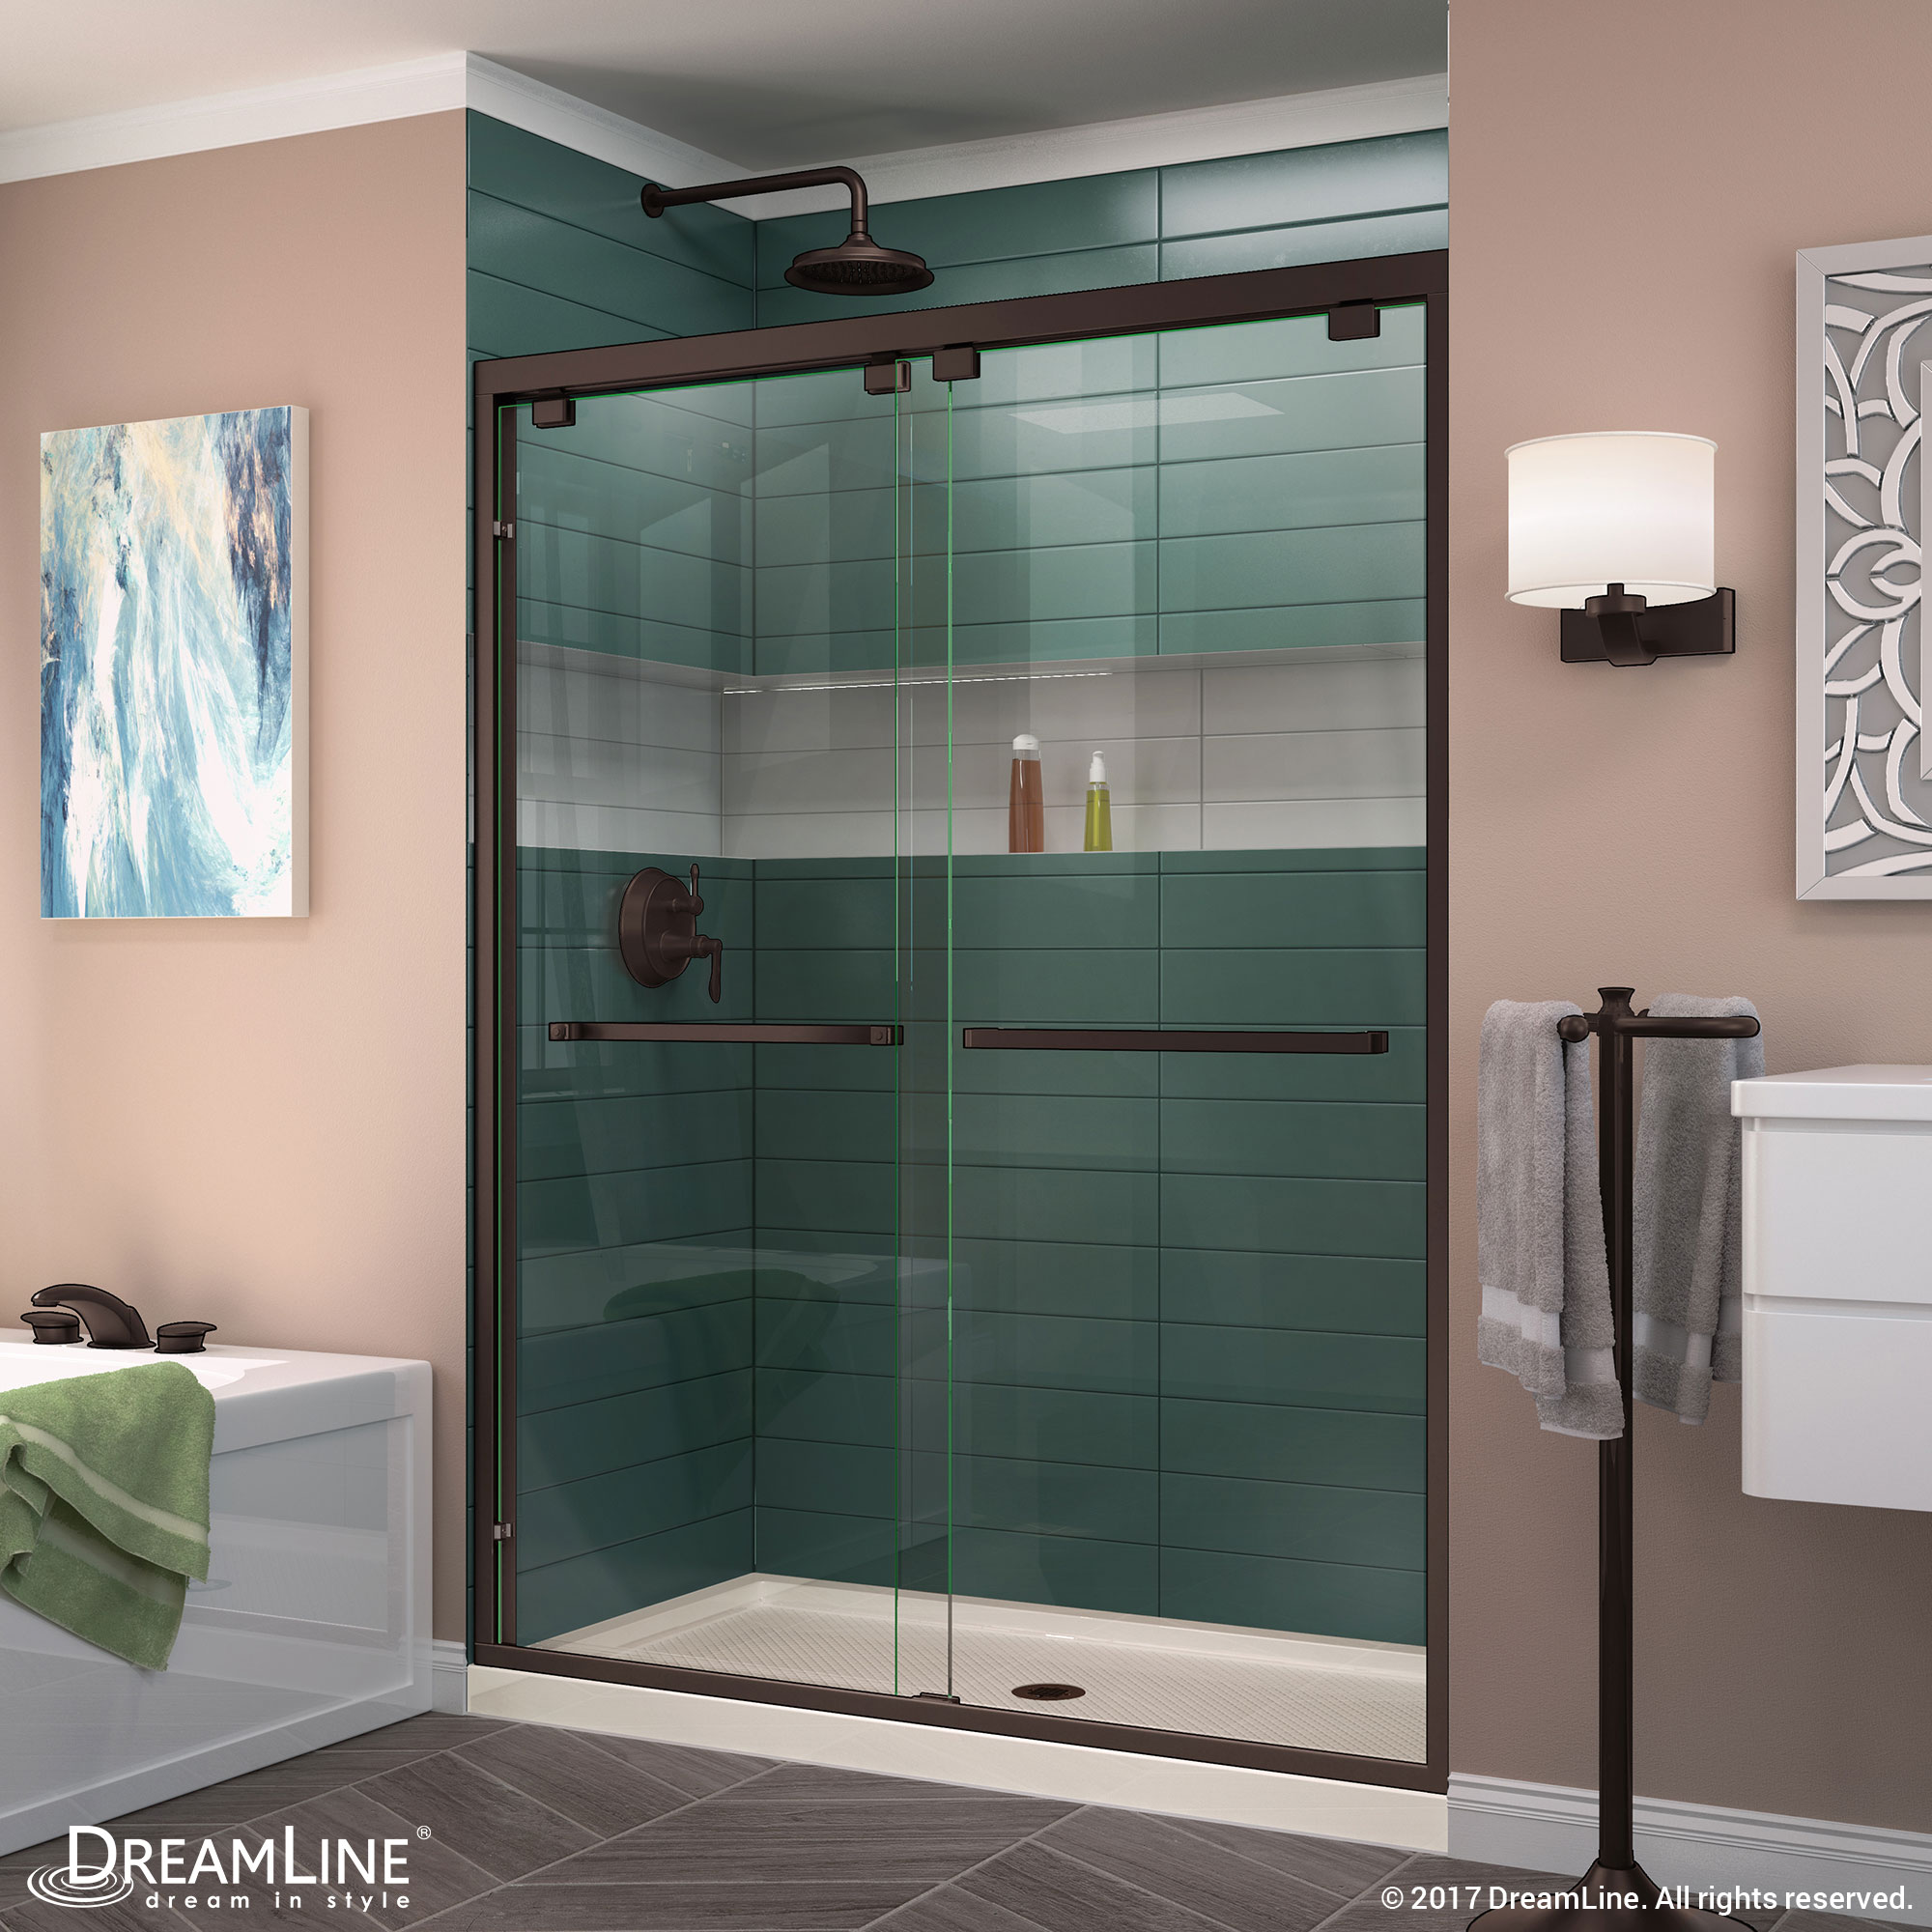 DreamLine Encore 32 in. D x 54 in. W x 78 3/4 in. H Bypass Shower Door in Brushed Nickel and Center Drain Biscuit Base Kit